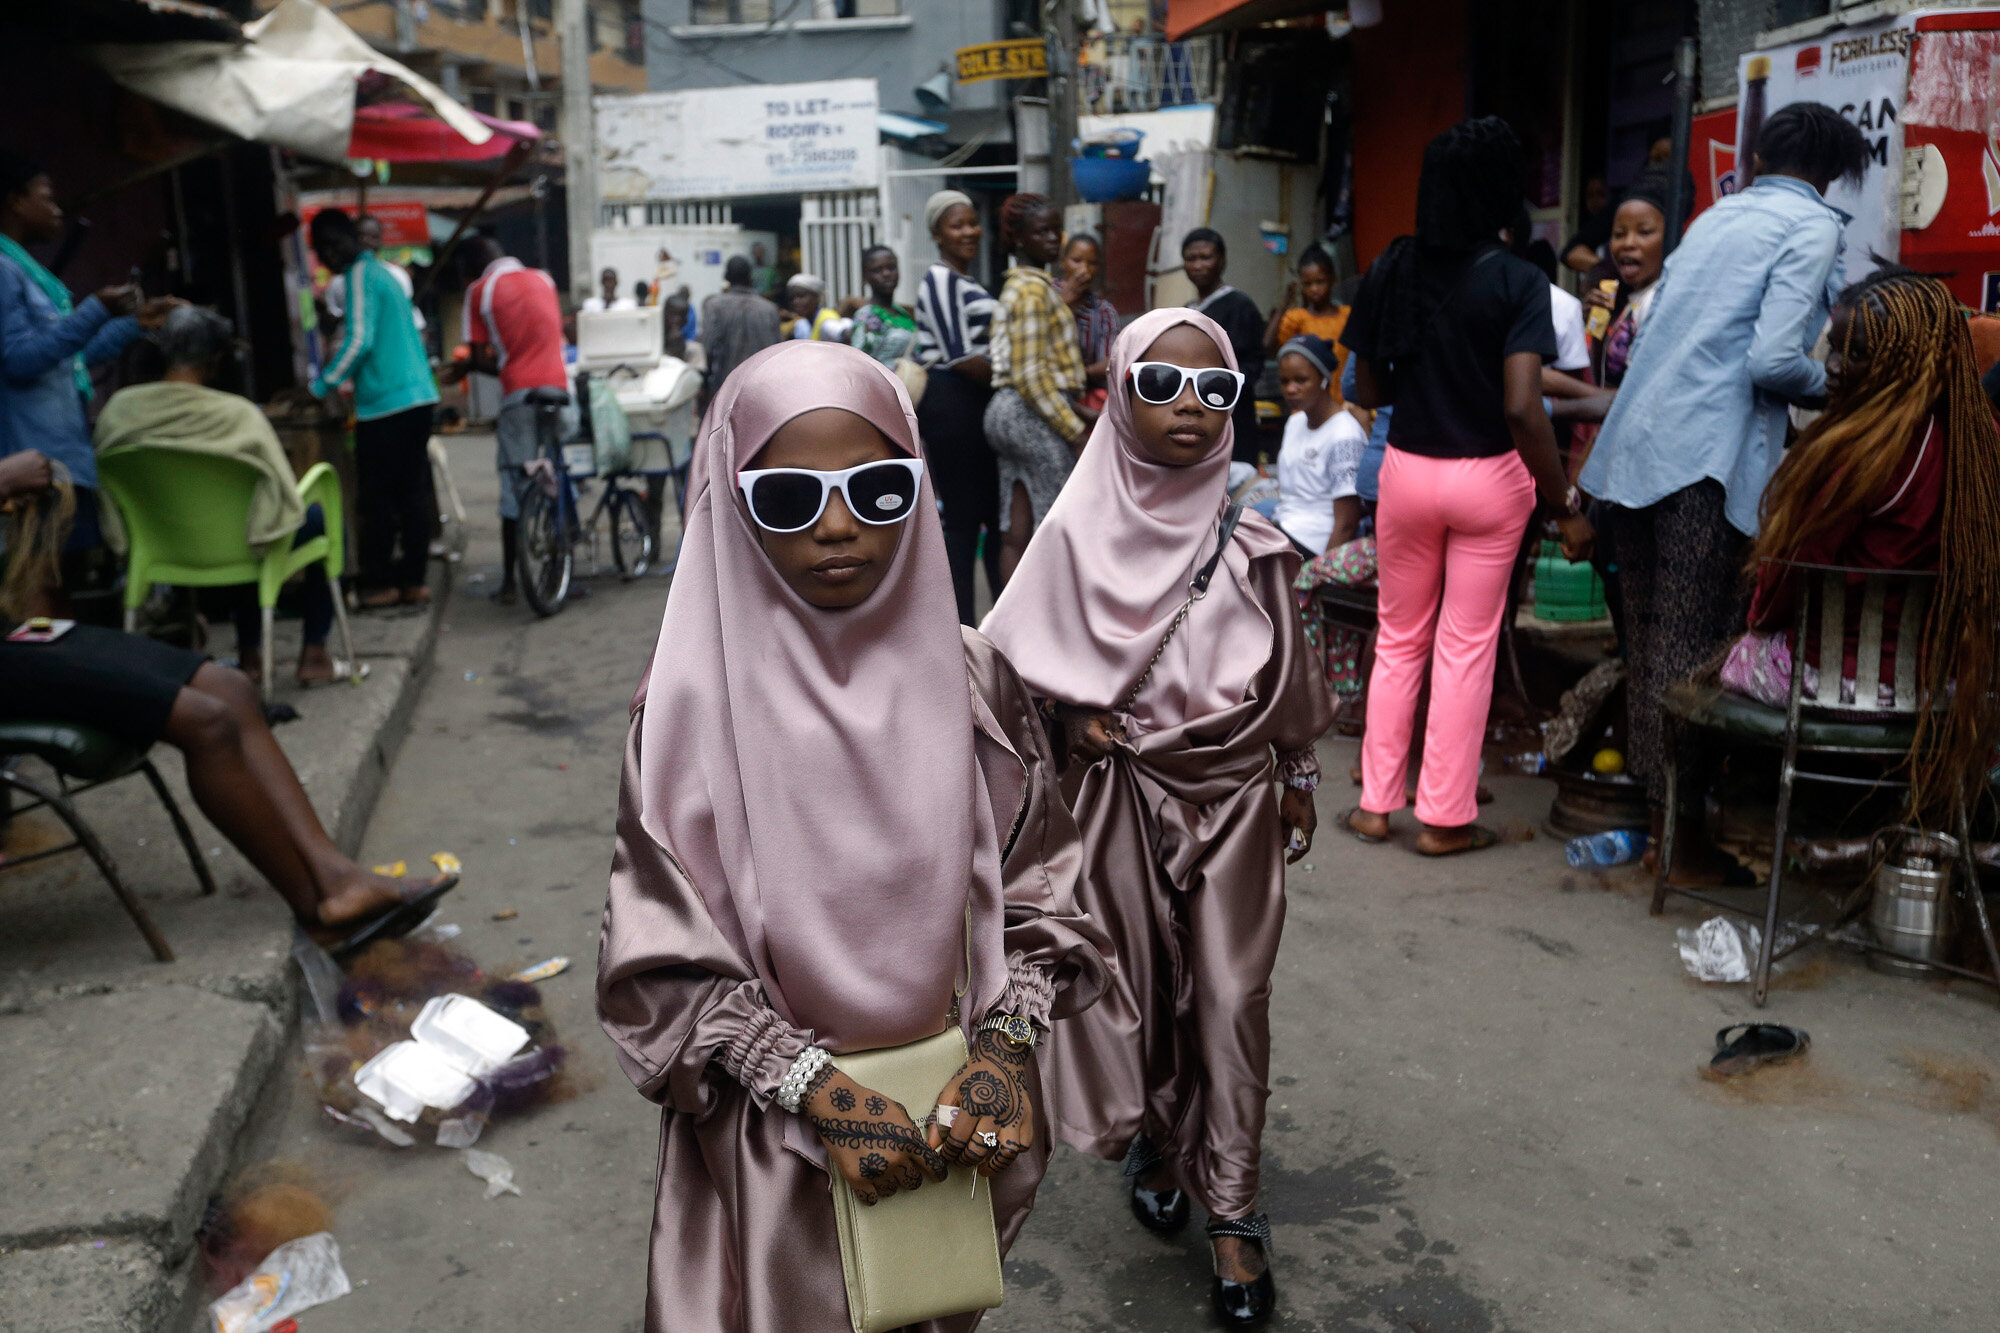  Muslim girls walk down the street after prayers in Lagos, Nigeria, on July 31, 2020, as Muslims worldwide marked the start of Eid al-Adha, or "Feast of Sacrifice," in which Muslims slaughter livestock and distribute the meat to the poor. (AP Photo/S